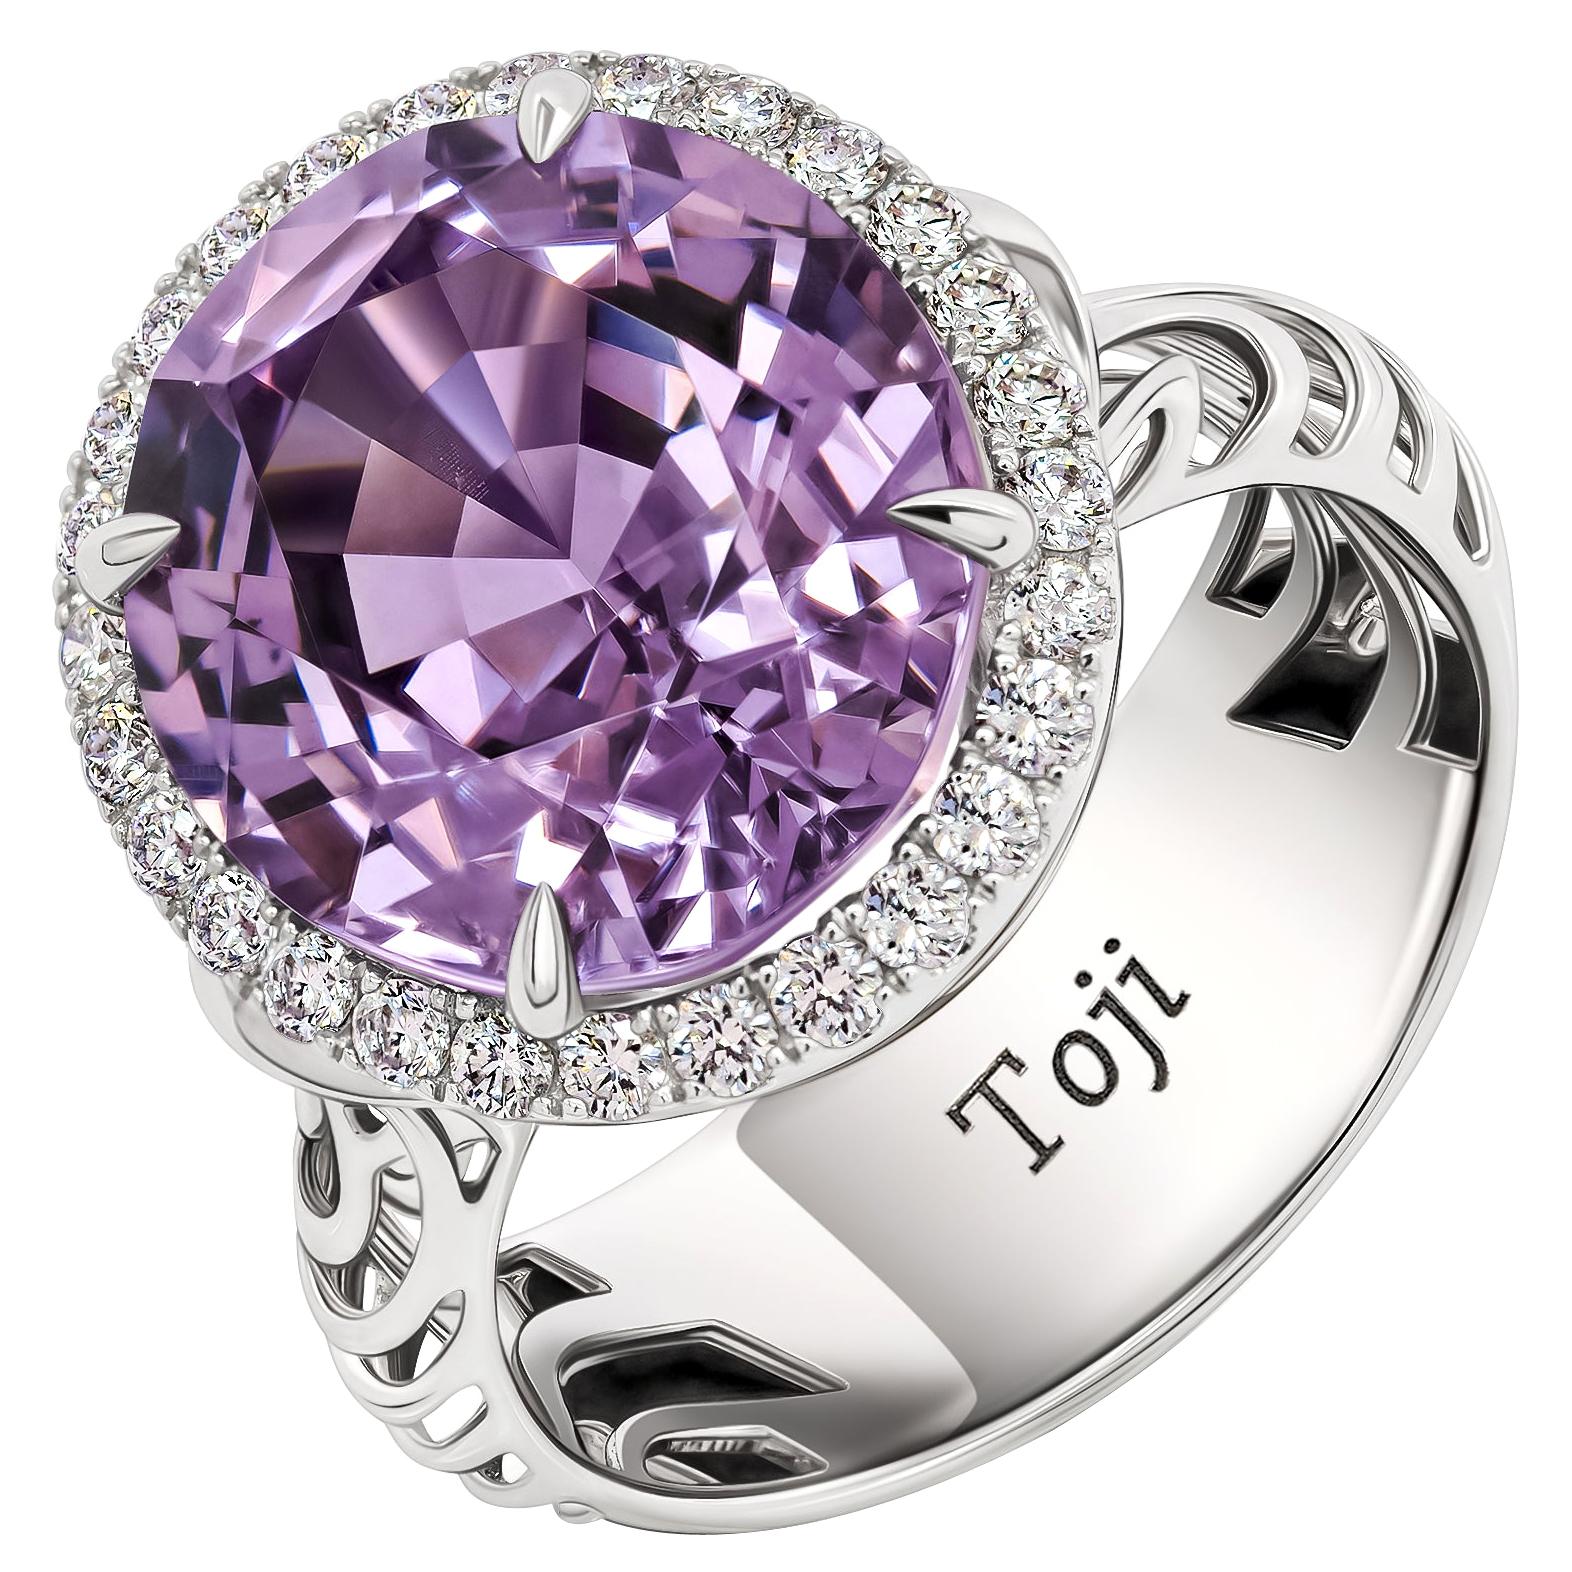 Lavender Spinel Ring, 18 K White Gold and Diamonds Lavender Spinel Ring For Sale